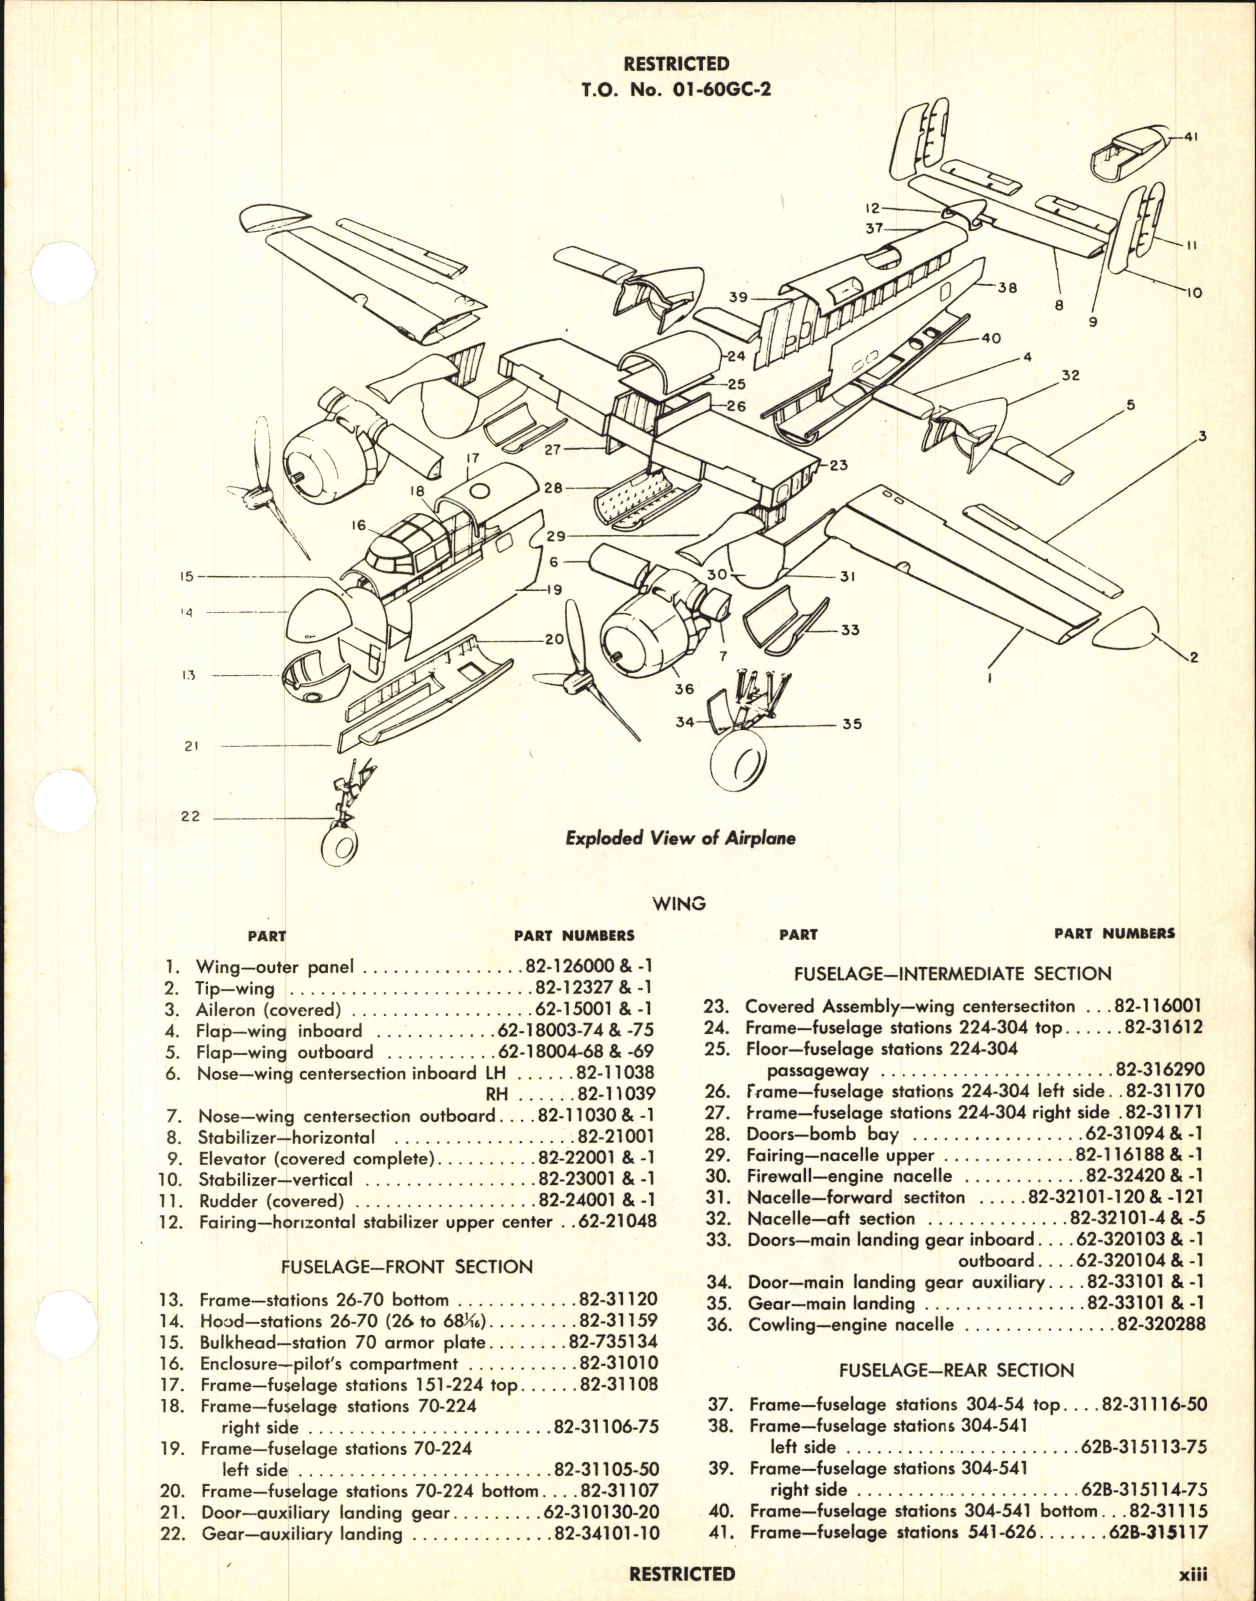 Sample page 17 from AirCorps Library document: Erection and Maintenance Instructions for B-25G and PBJ-1G Airplanes